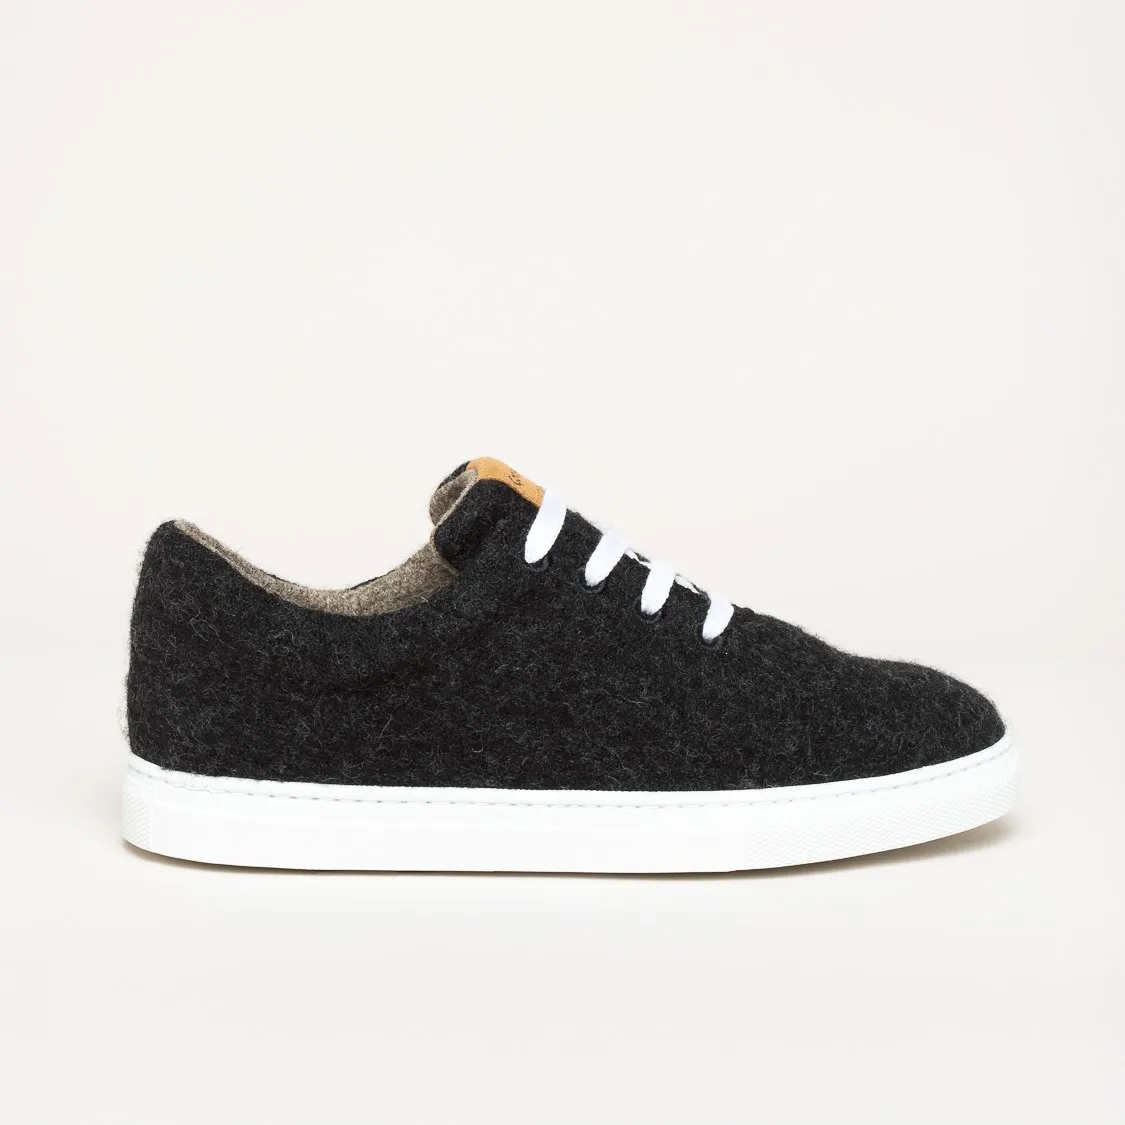 Wool shoes for men - Order online now!